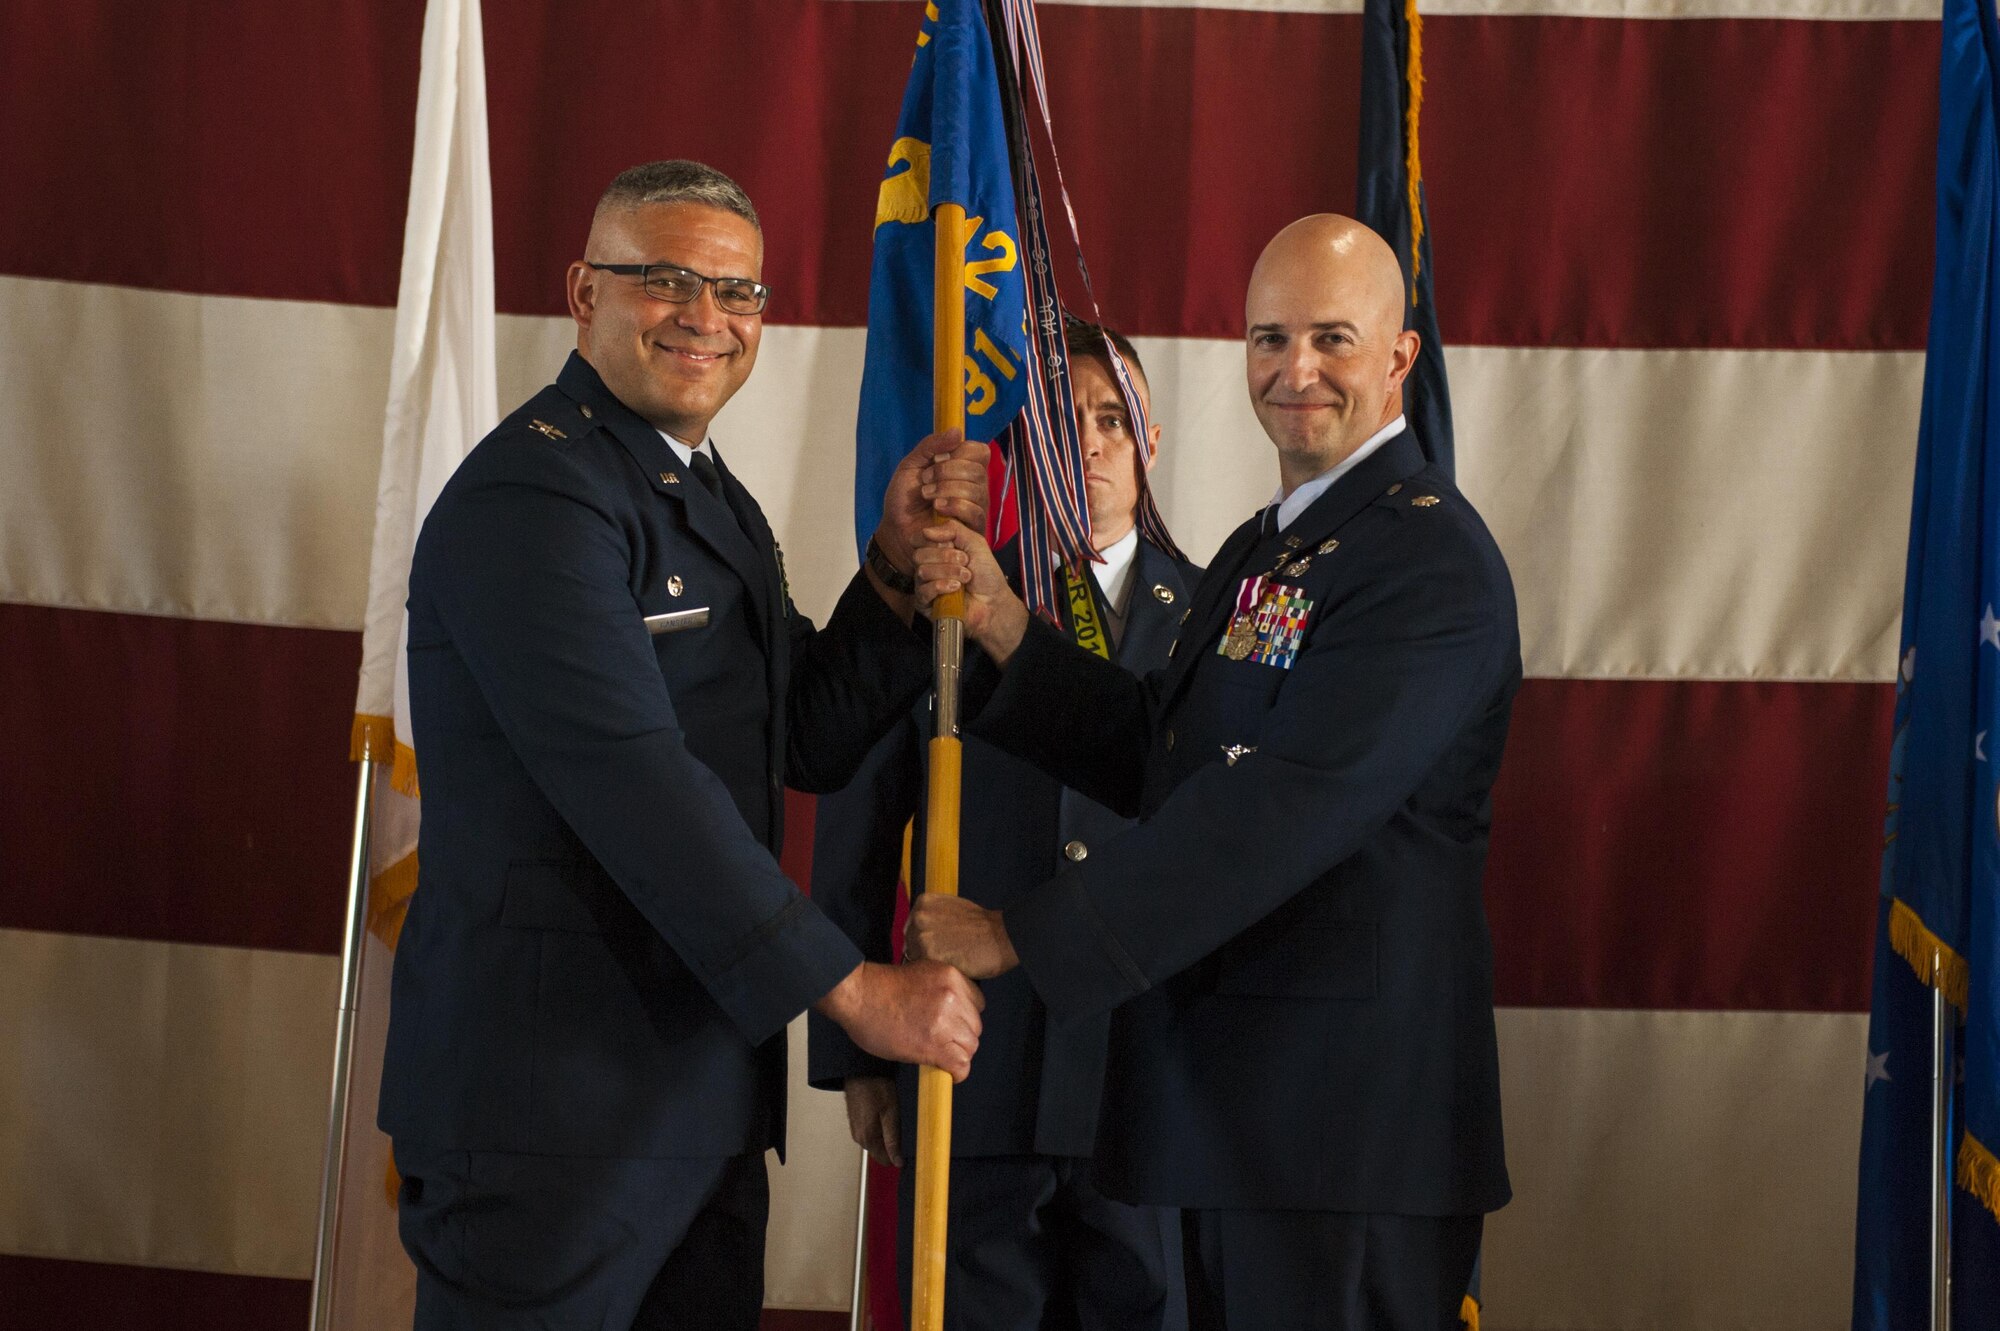 U.S. Air Force Lt. Col. Matthew Welling, prior 312th Training Squadron Commander, passes the unit guideon to Col. Alejandro Ganster, 17th Training Group Commander, during the 312th TRS change of command at the Louis F. Garland Department of Defense Fire Academy High Bay Fire Academy high bay on Goodfellow Air Force Base, Texas, July 10, 2017. Welling served as the 316th TRS Commander from 2015 to 2017. (U.S. Air Force photo by Senior Airman Scott Jackson/Released)